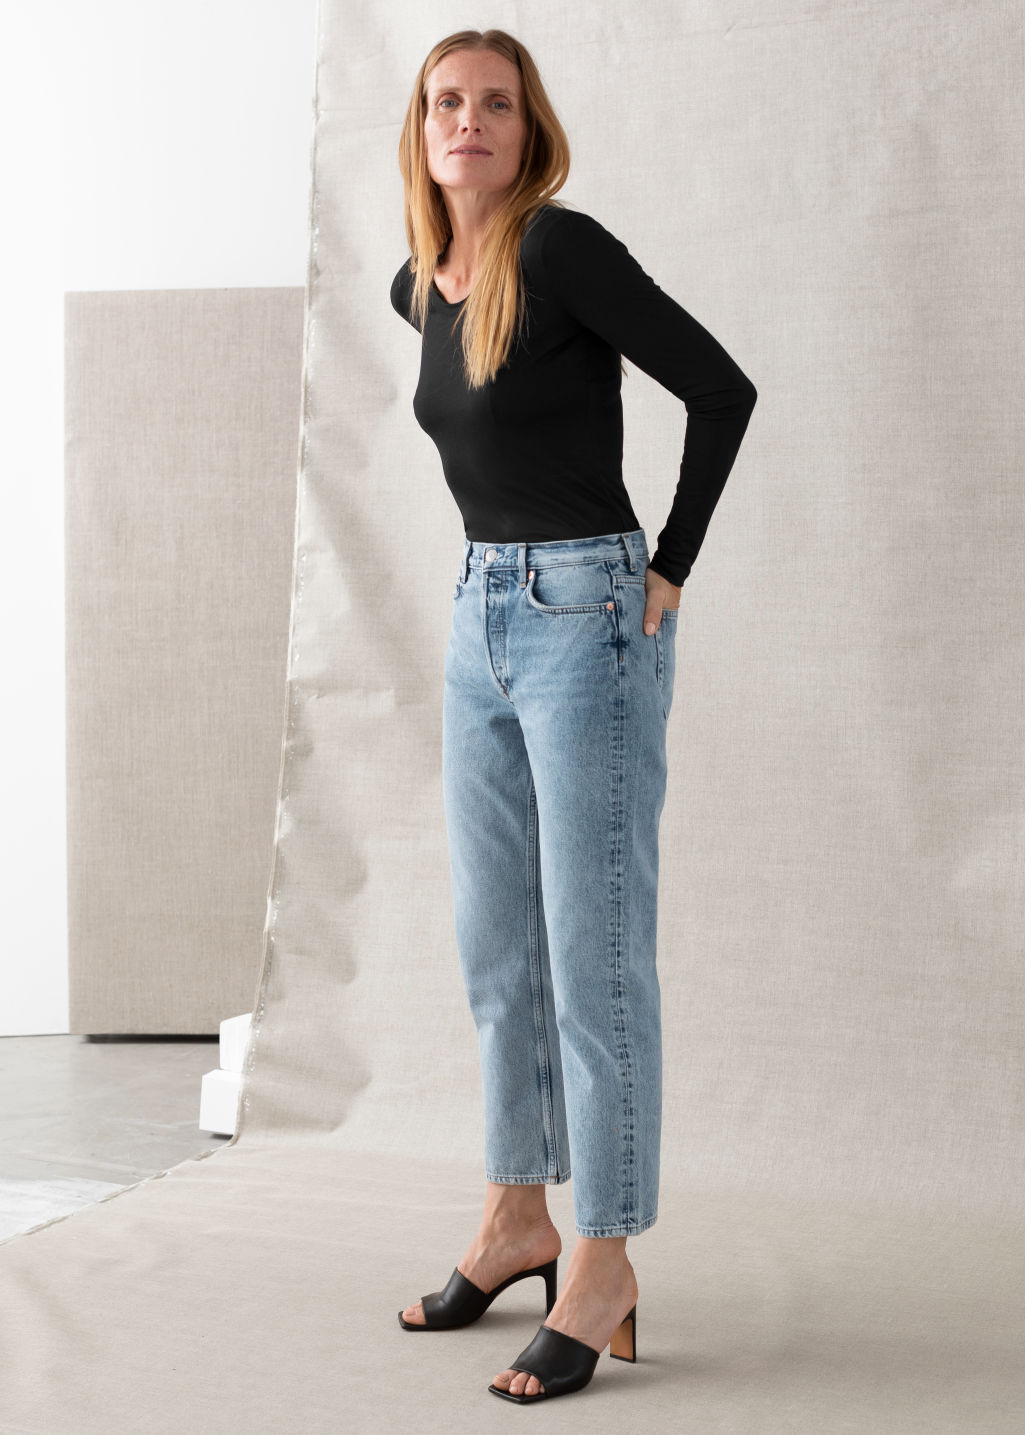 Keeper Cut Cropped Jeans - White - Jeans - & Other Stories